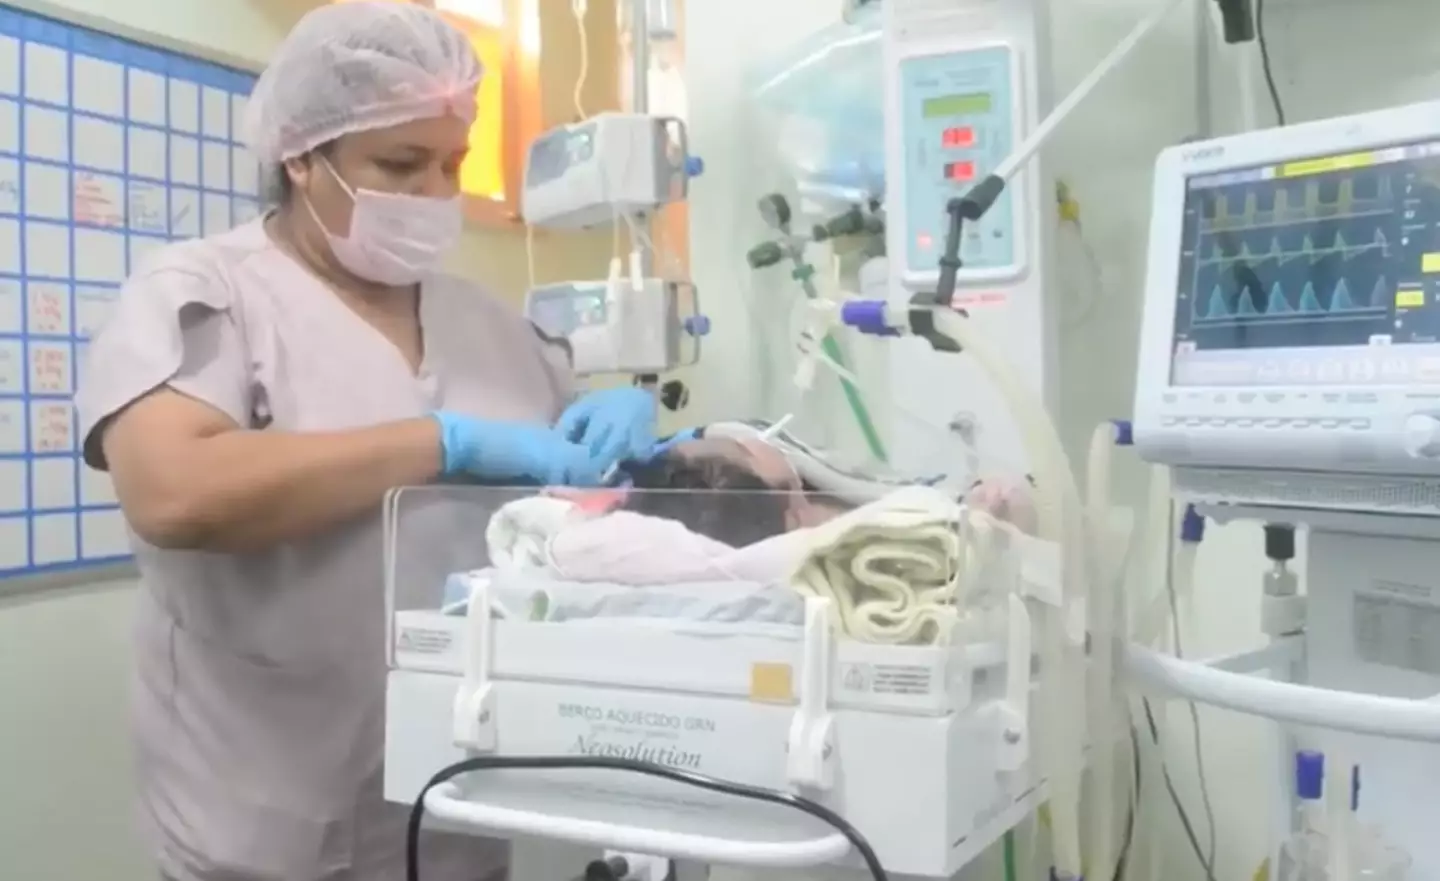 One mum left doctors baffled after giving birth to a 'giant' baby.